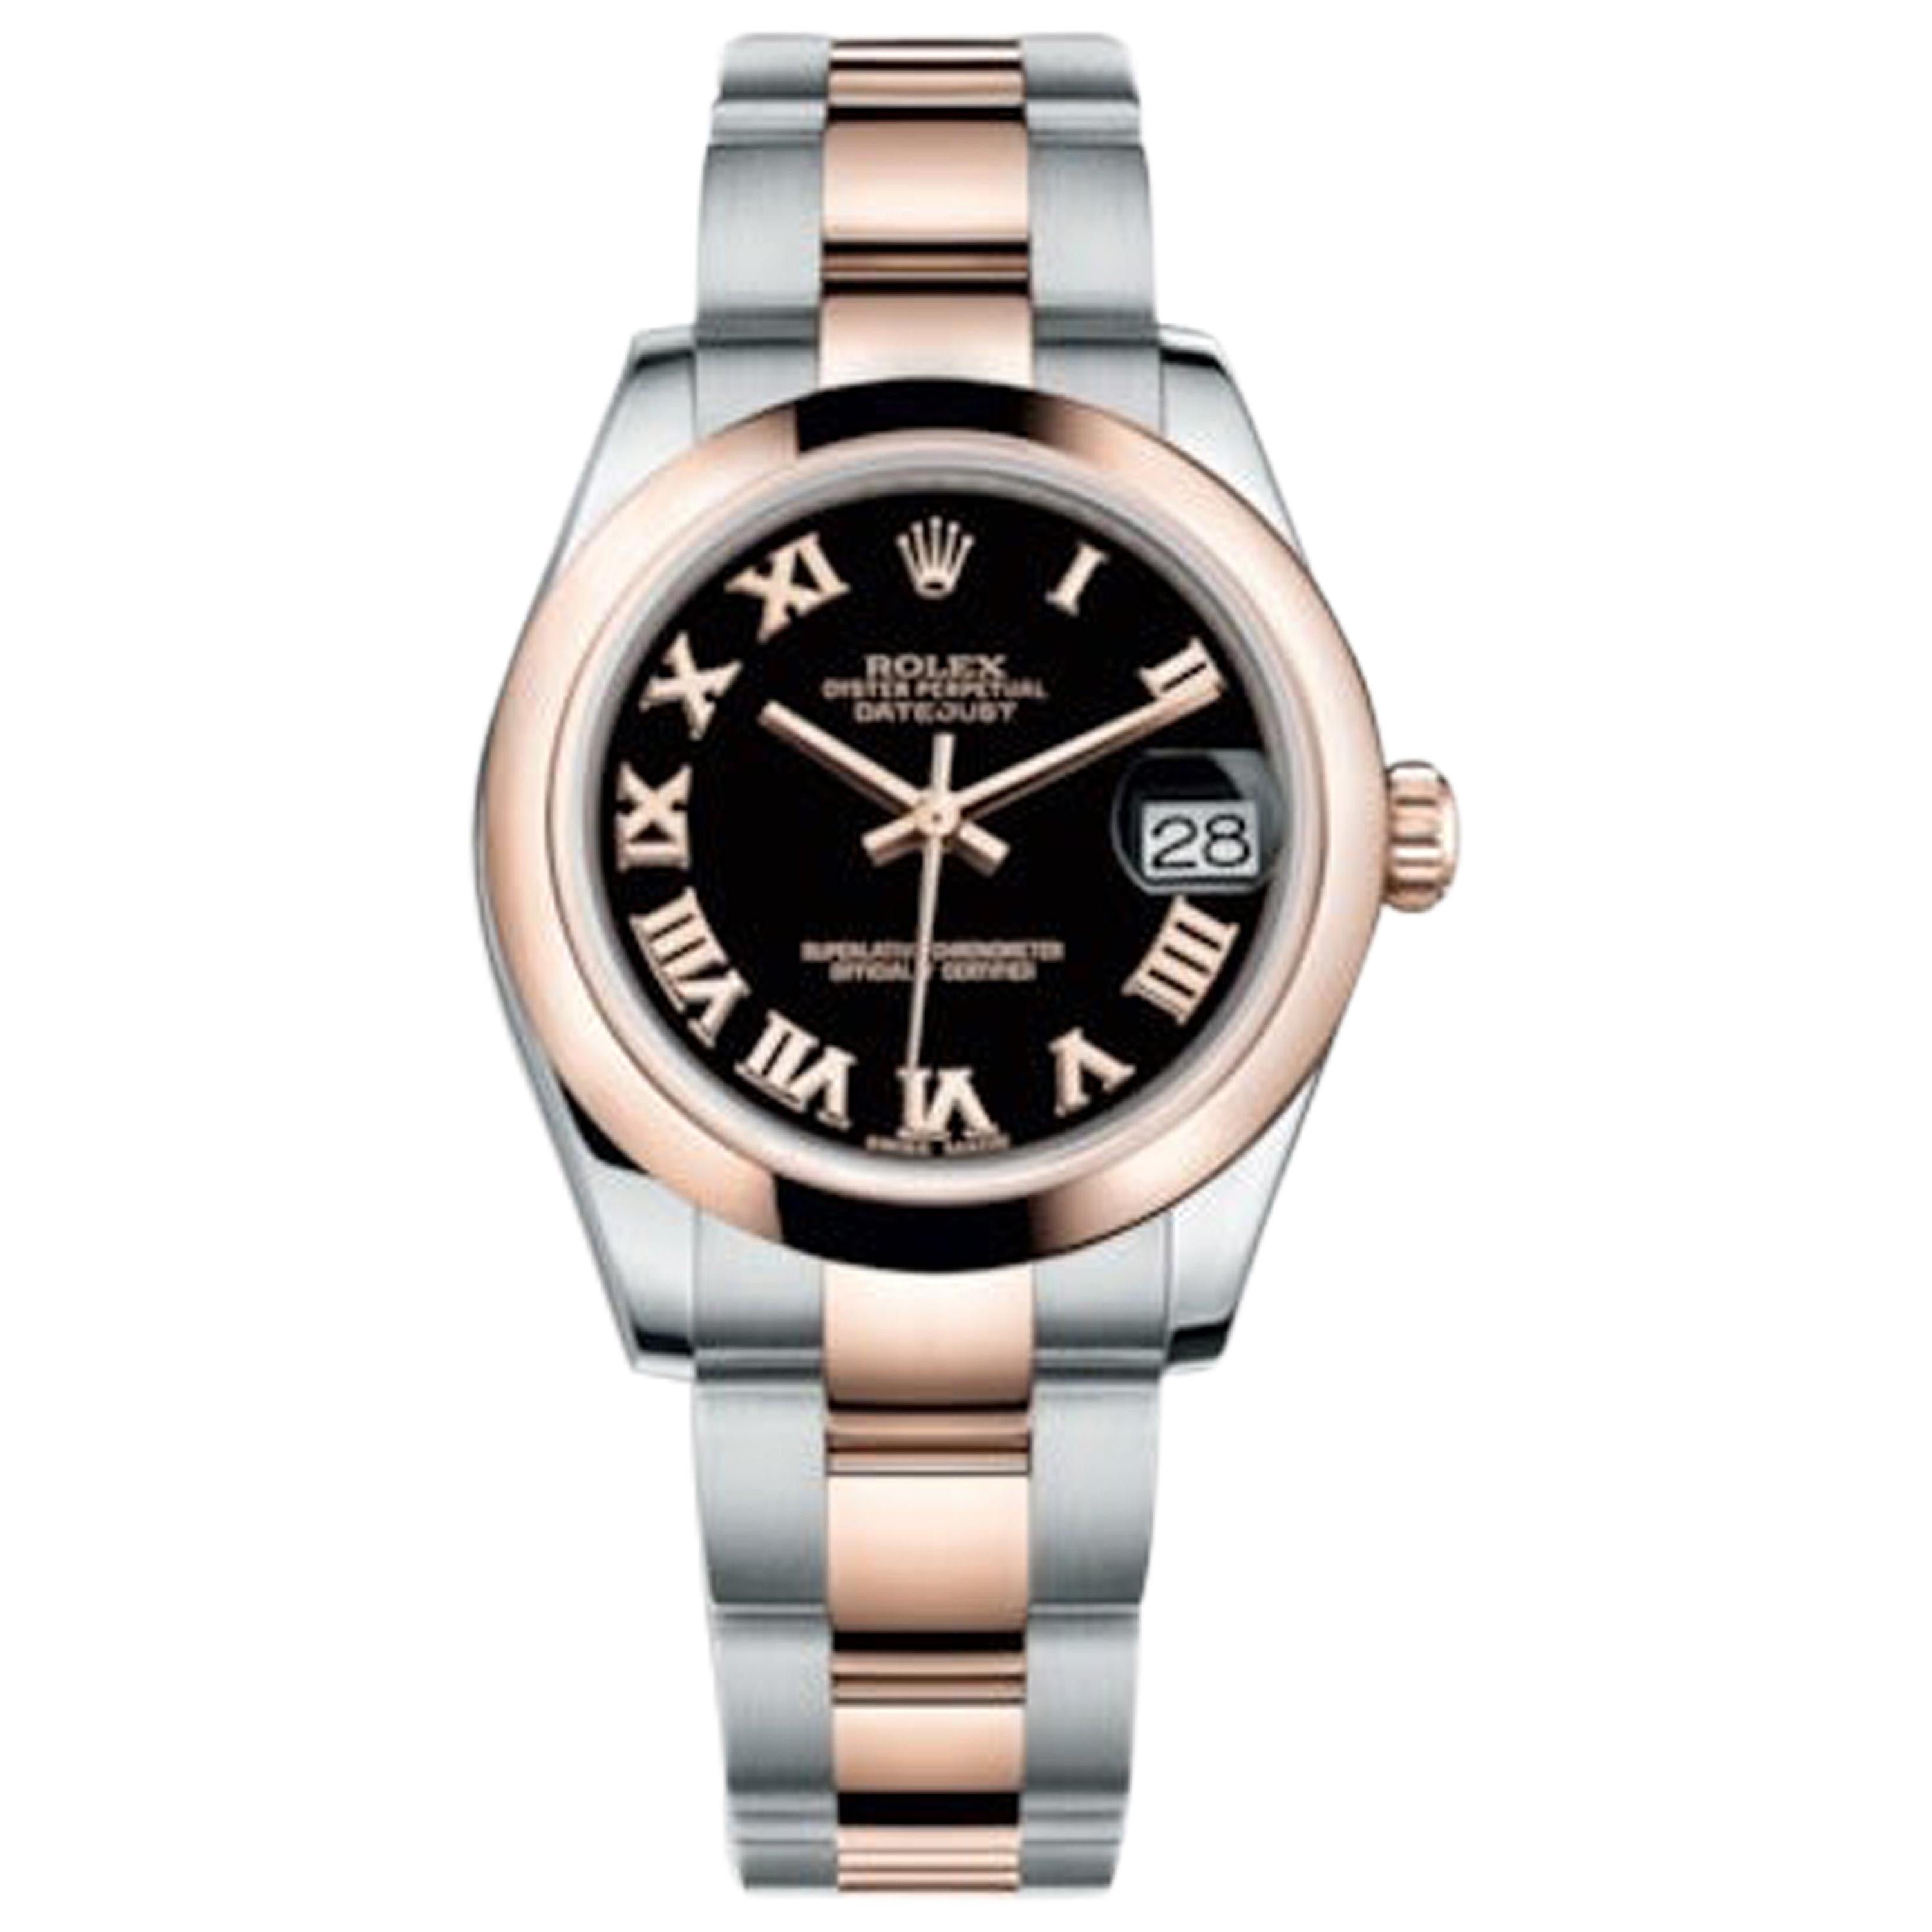 Rolex Datejust Stainless Steel and Rose Gold Ladies Watch 178241 Blk Roman